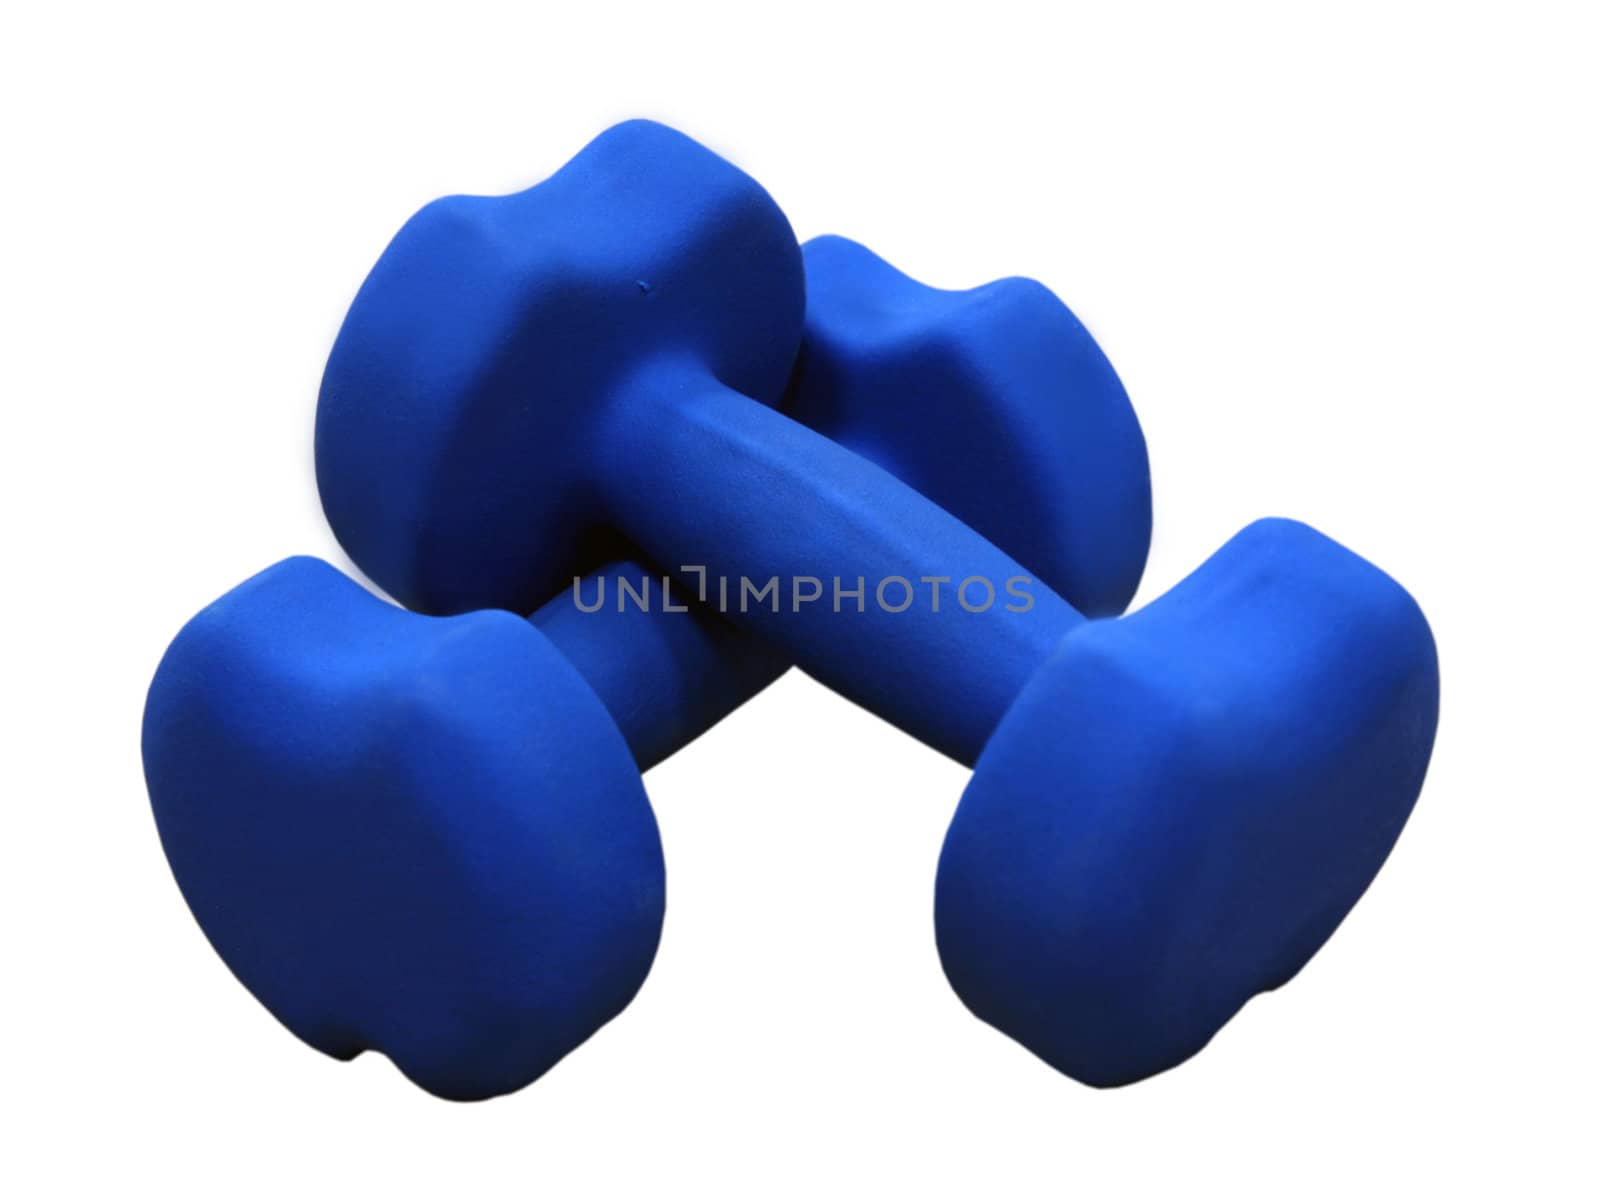 Dark blue dumbbells for employment by fitness